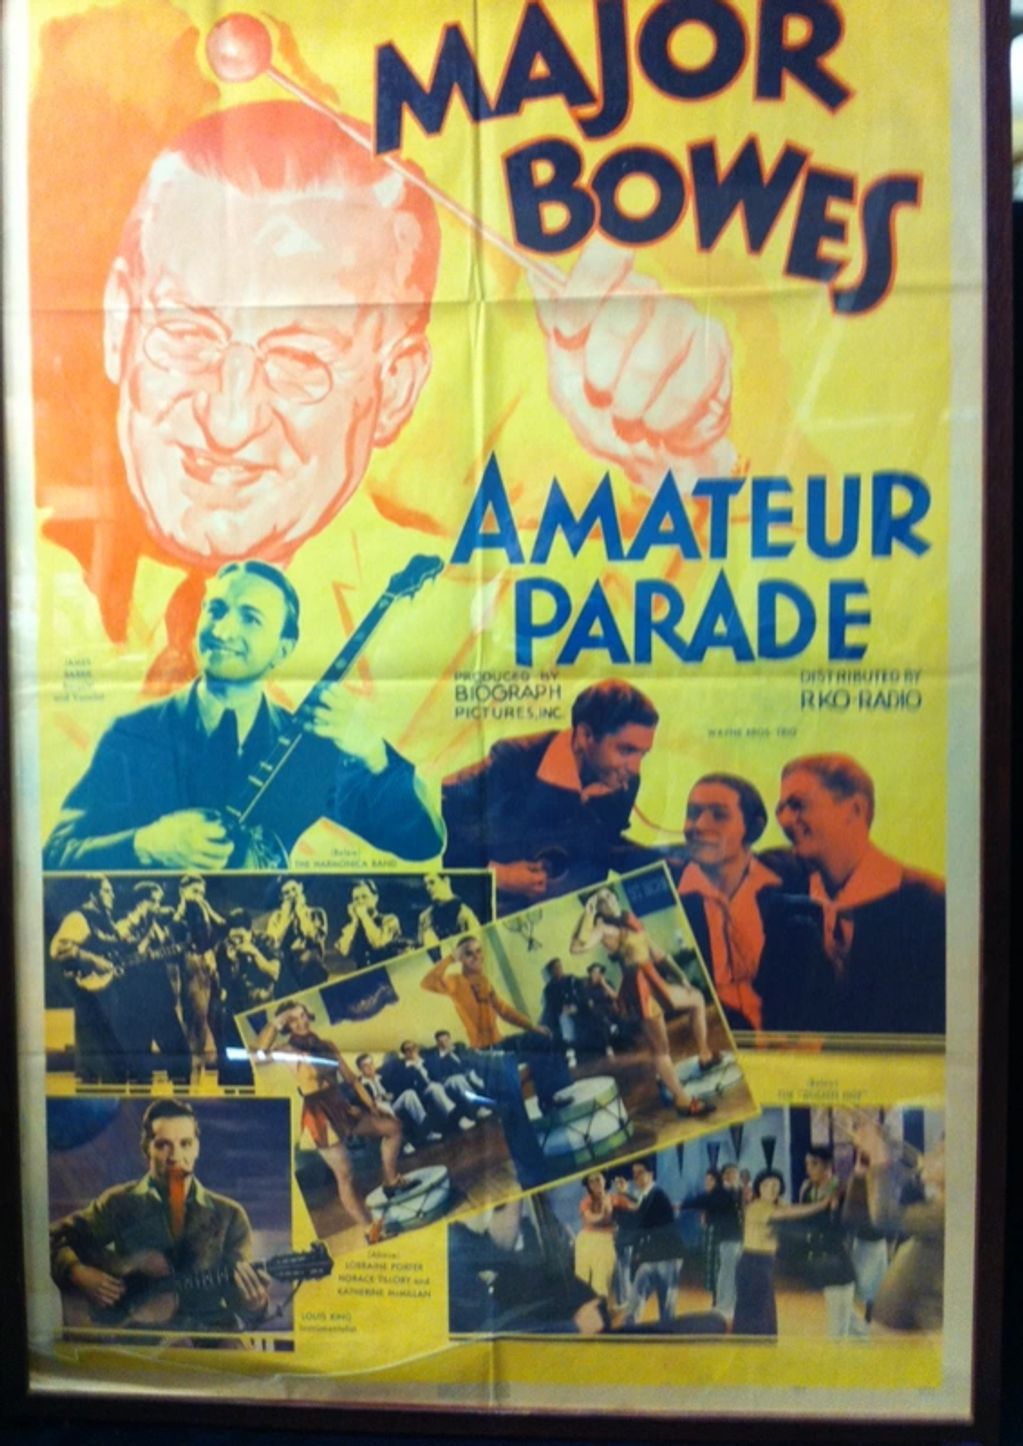 Theatre Lobby Posters for Major Bowes “Amateur Parade